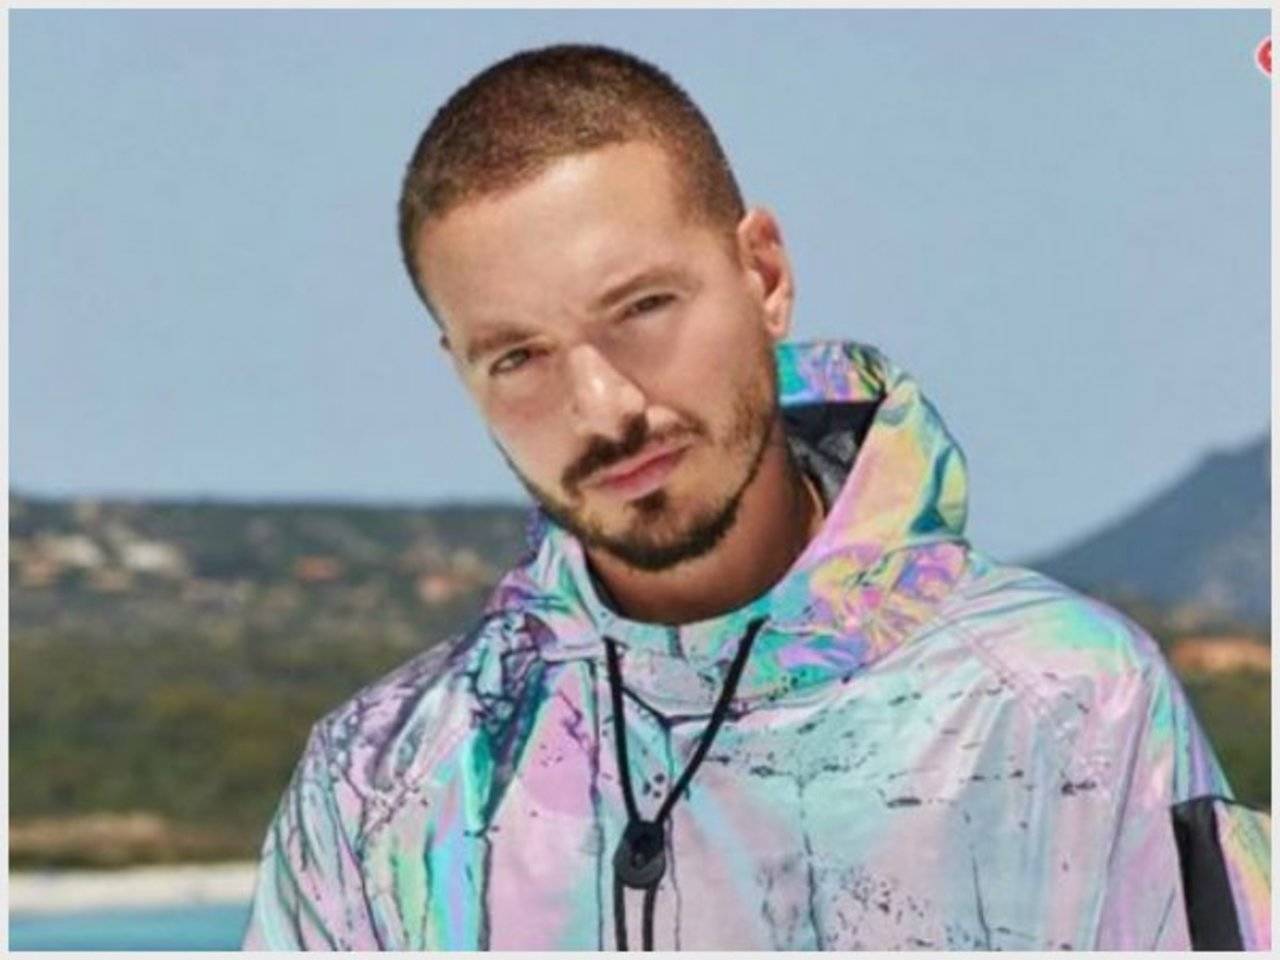 SPOTTED: J Balvin Covers L'Officiel India's April 2021 Issue